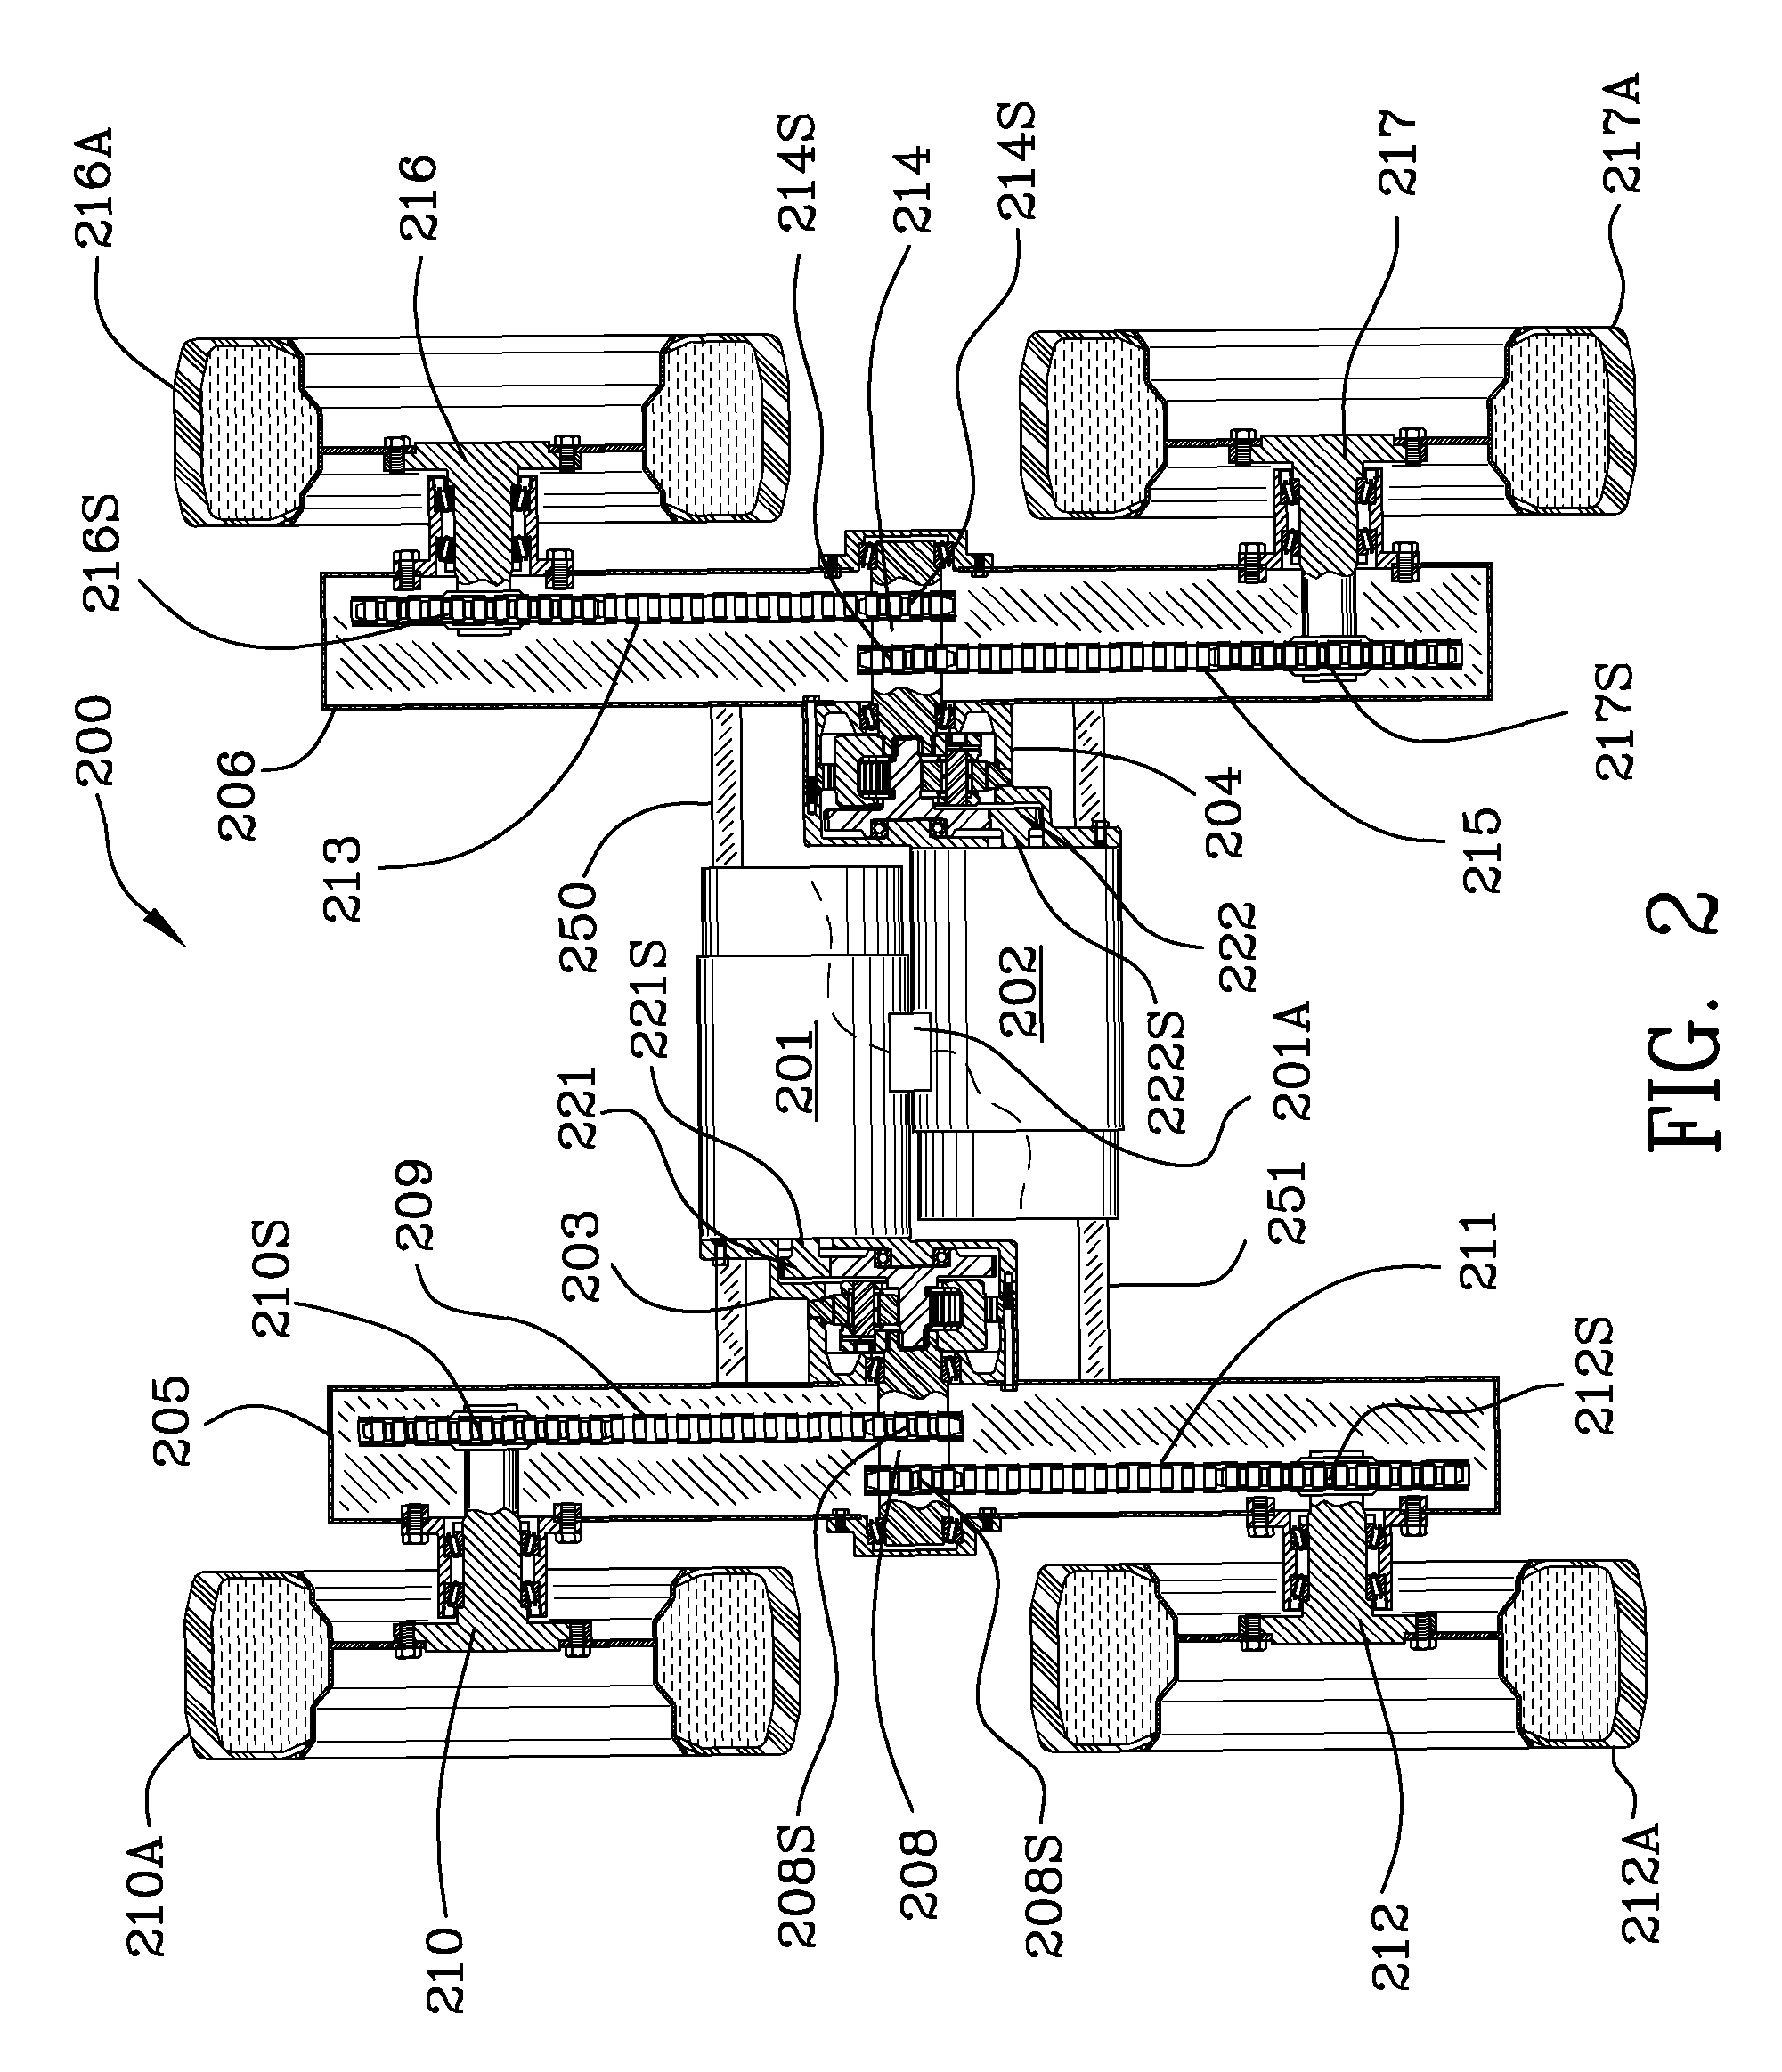 Offset drive system for utility vehicles